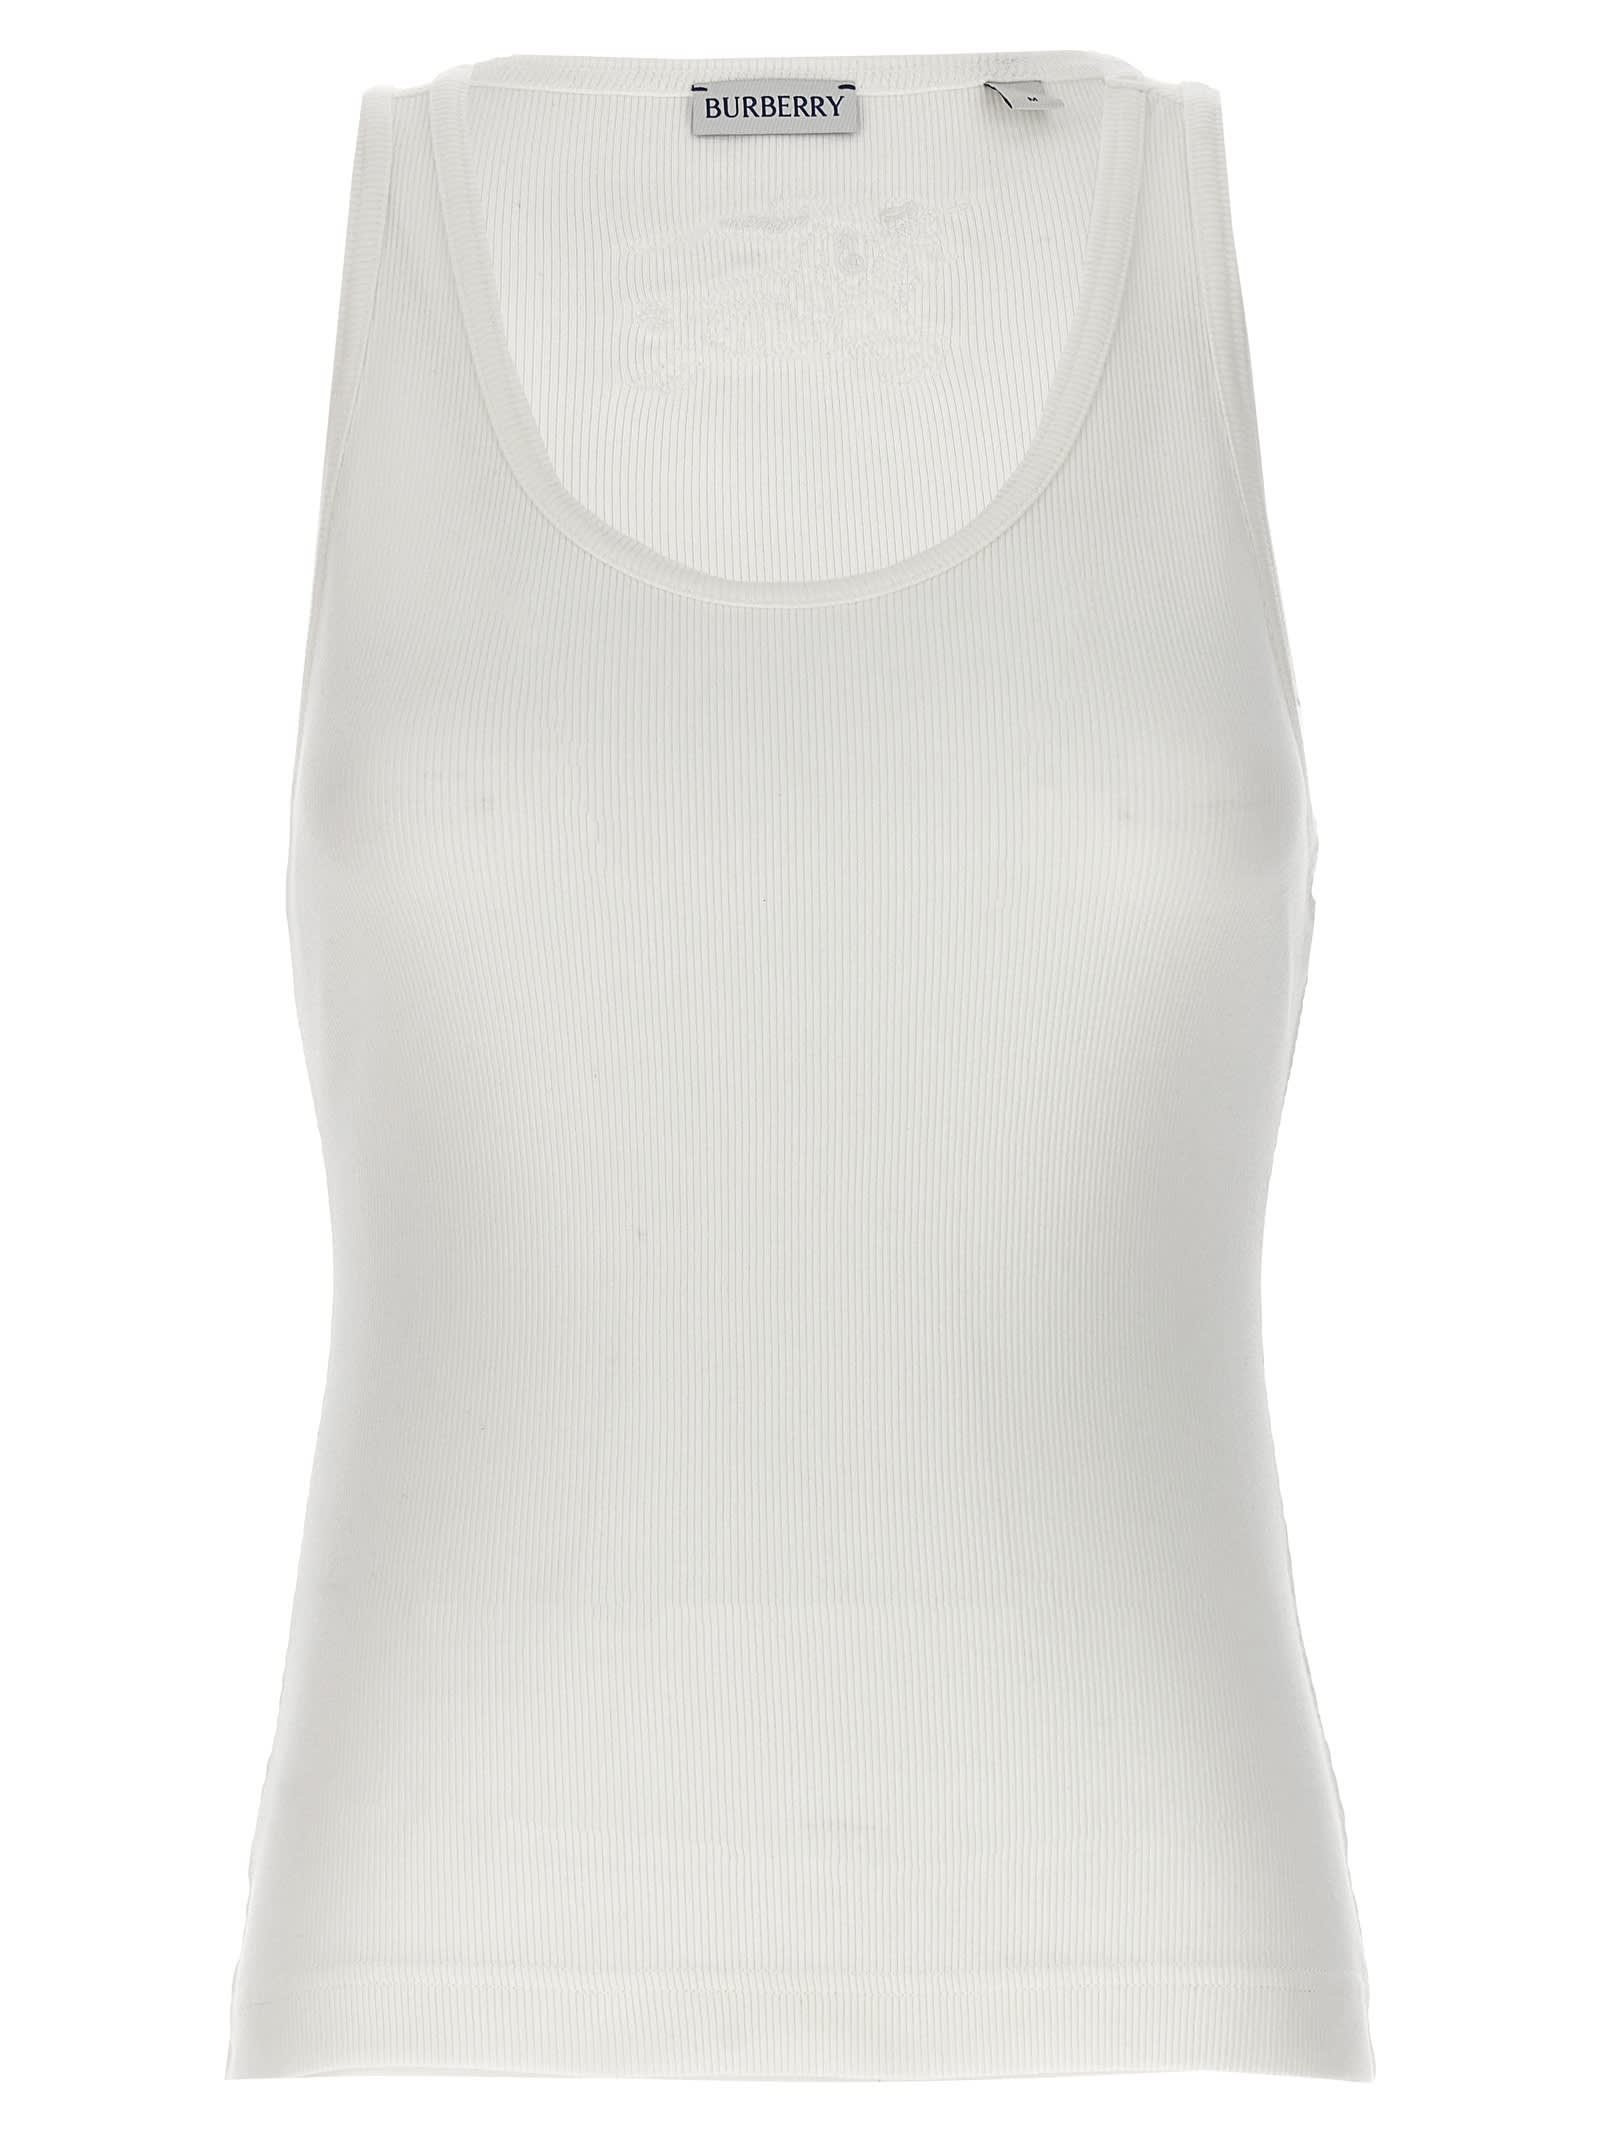 Burberry Logo Embroidery Tank Top